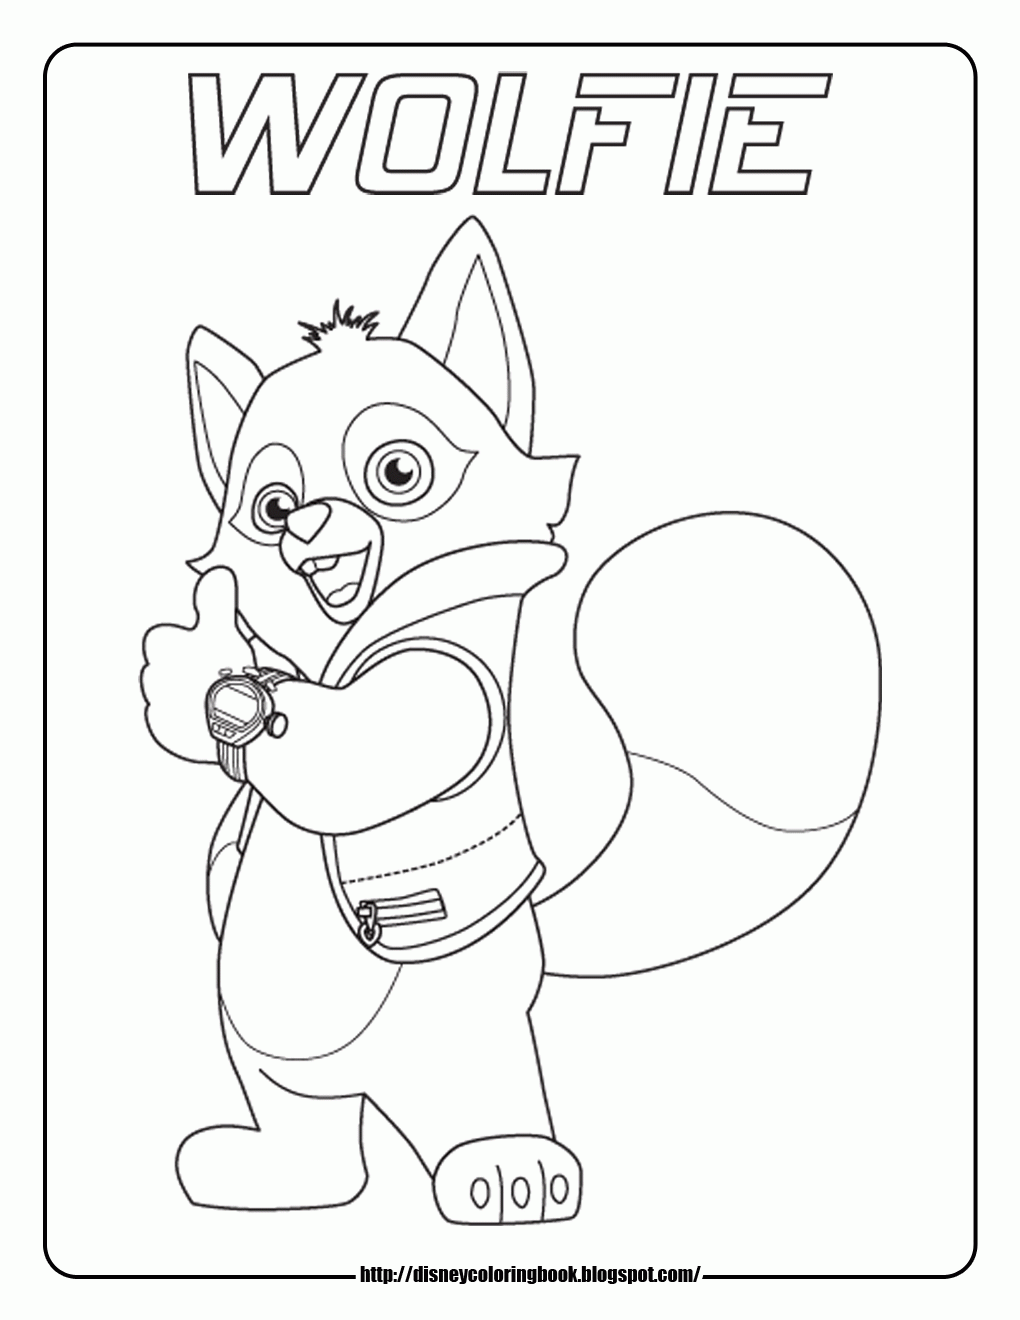 Special Agent Oso Wolfie Coloring Page